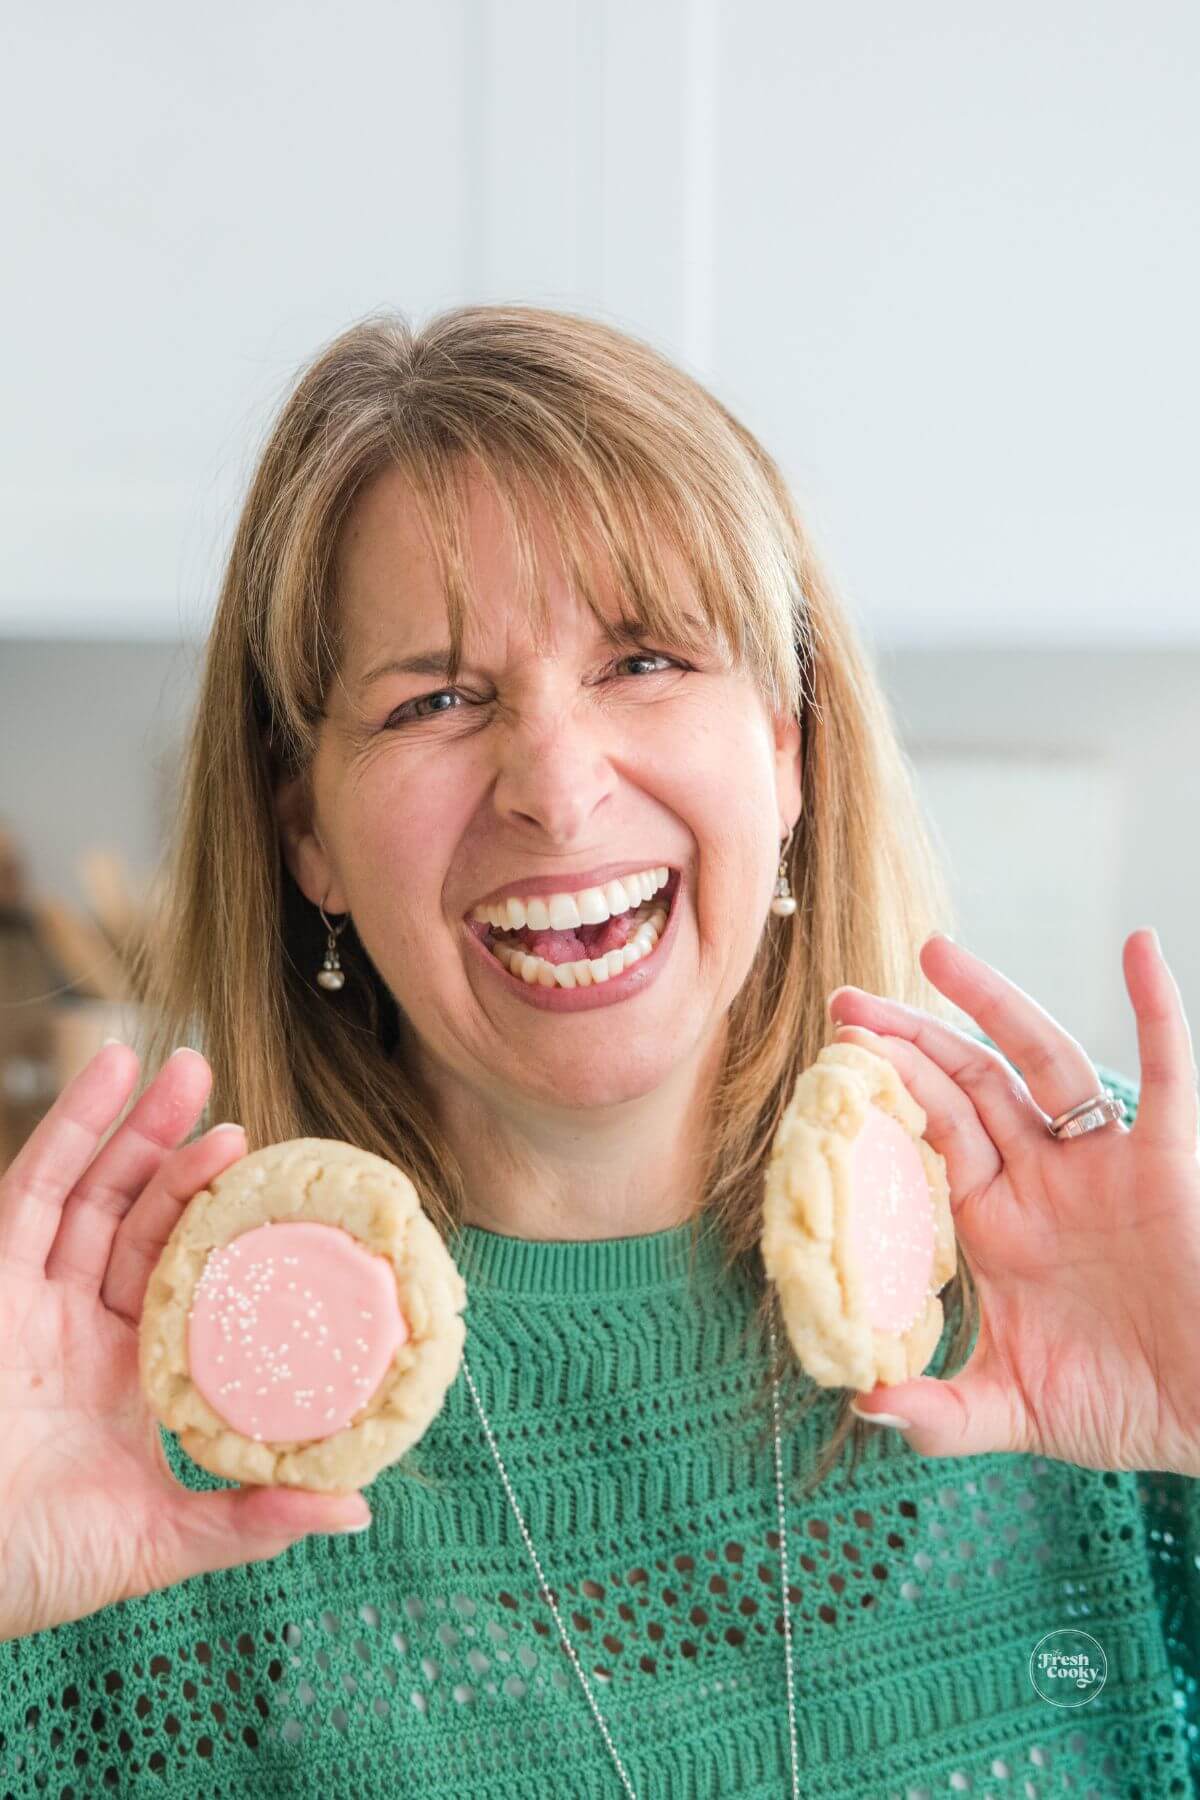 Kathleen laughing with cookies in hand.